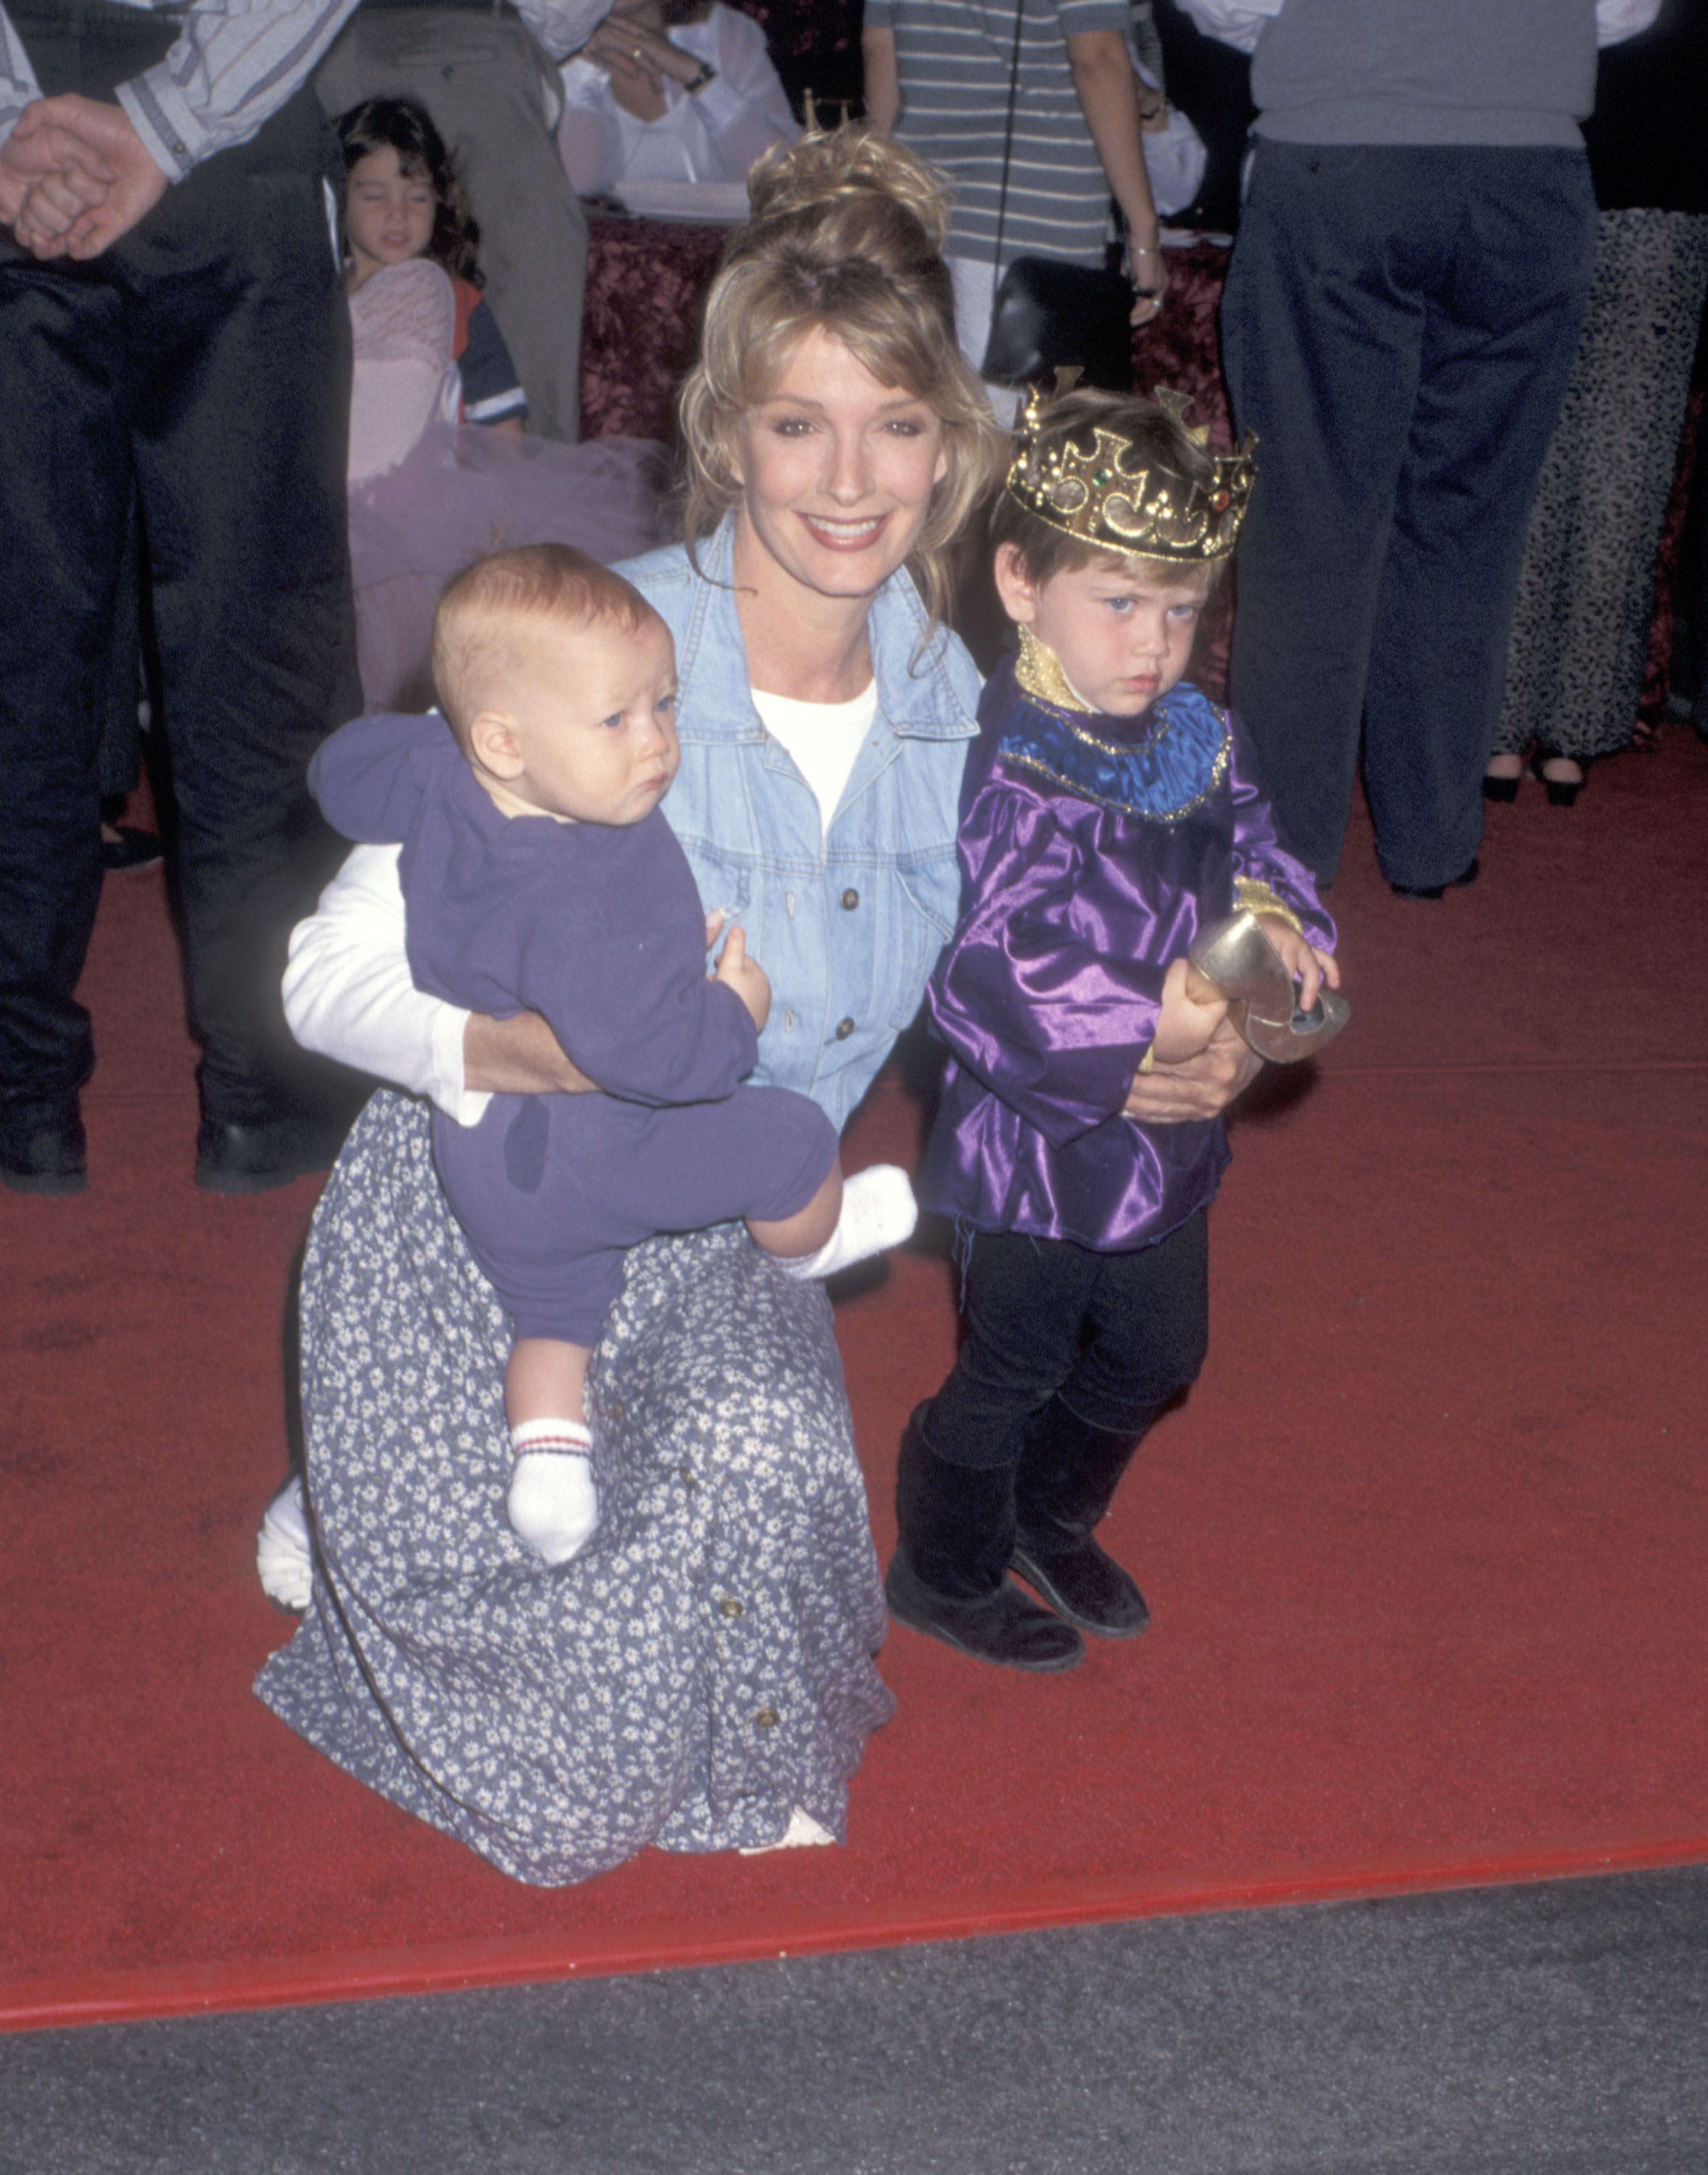 Deidre Hall and her sons Tully and David Sohmer at the "Cinderella" Video Cassette and Album Release Party on October 2, 1995, in Burbank, California | Source: Getty Images